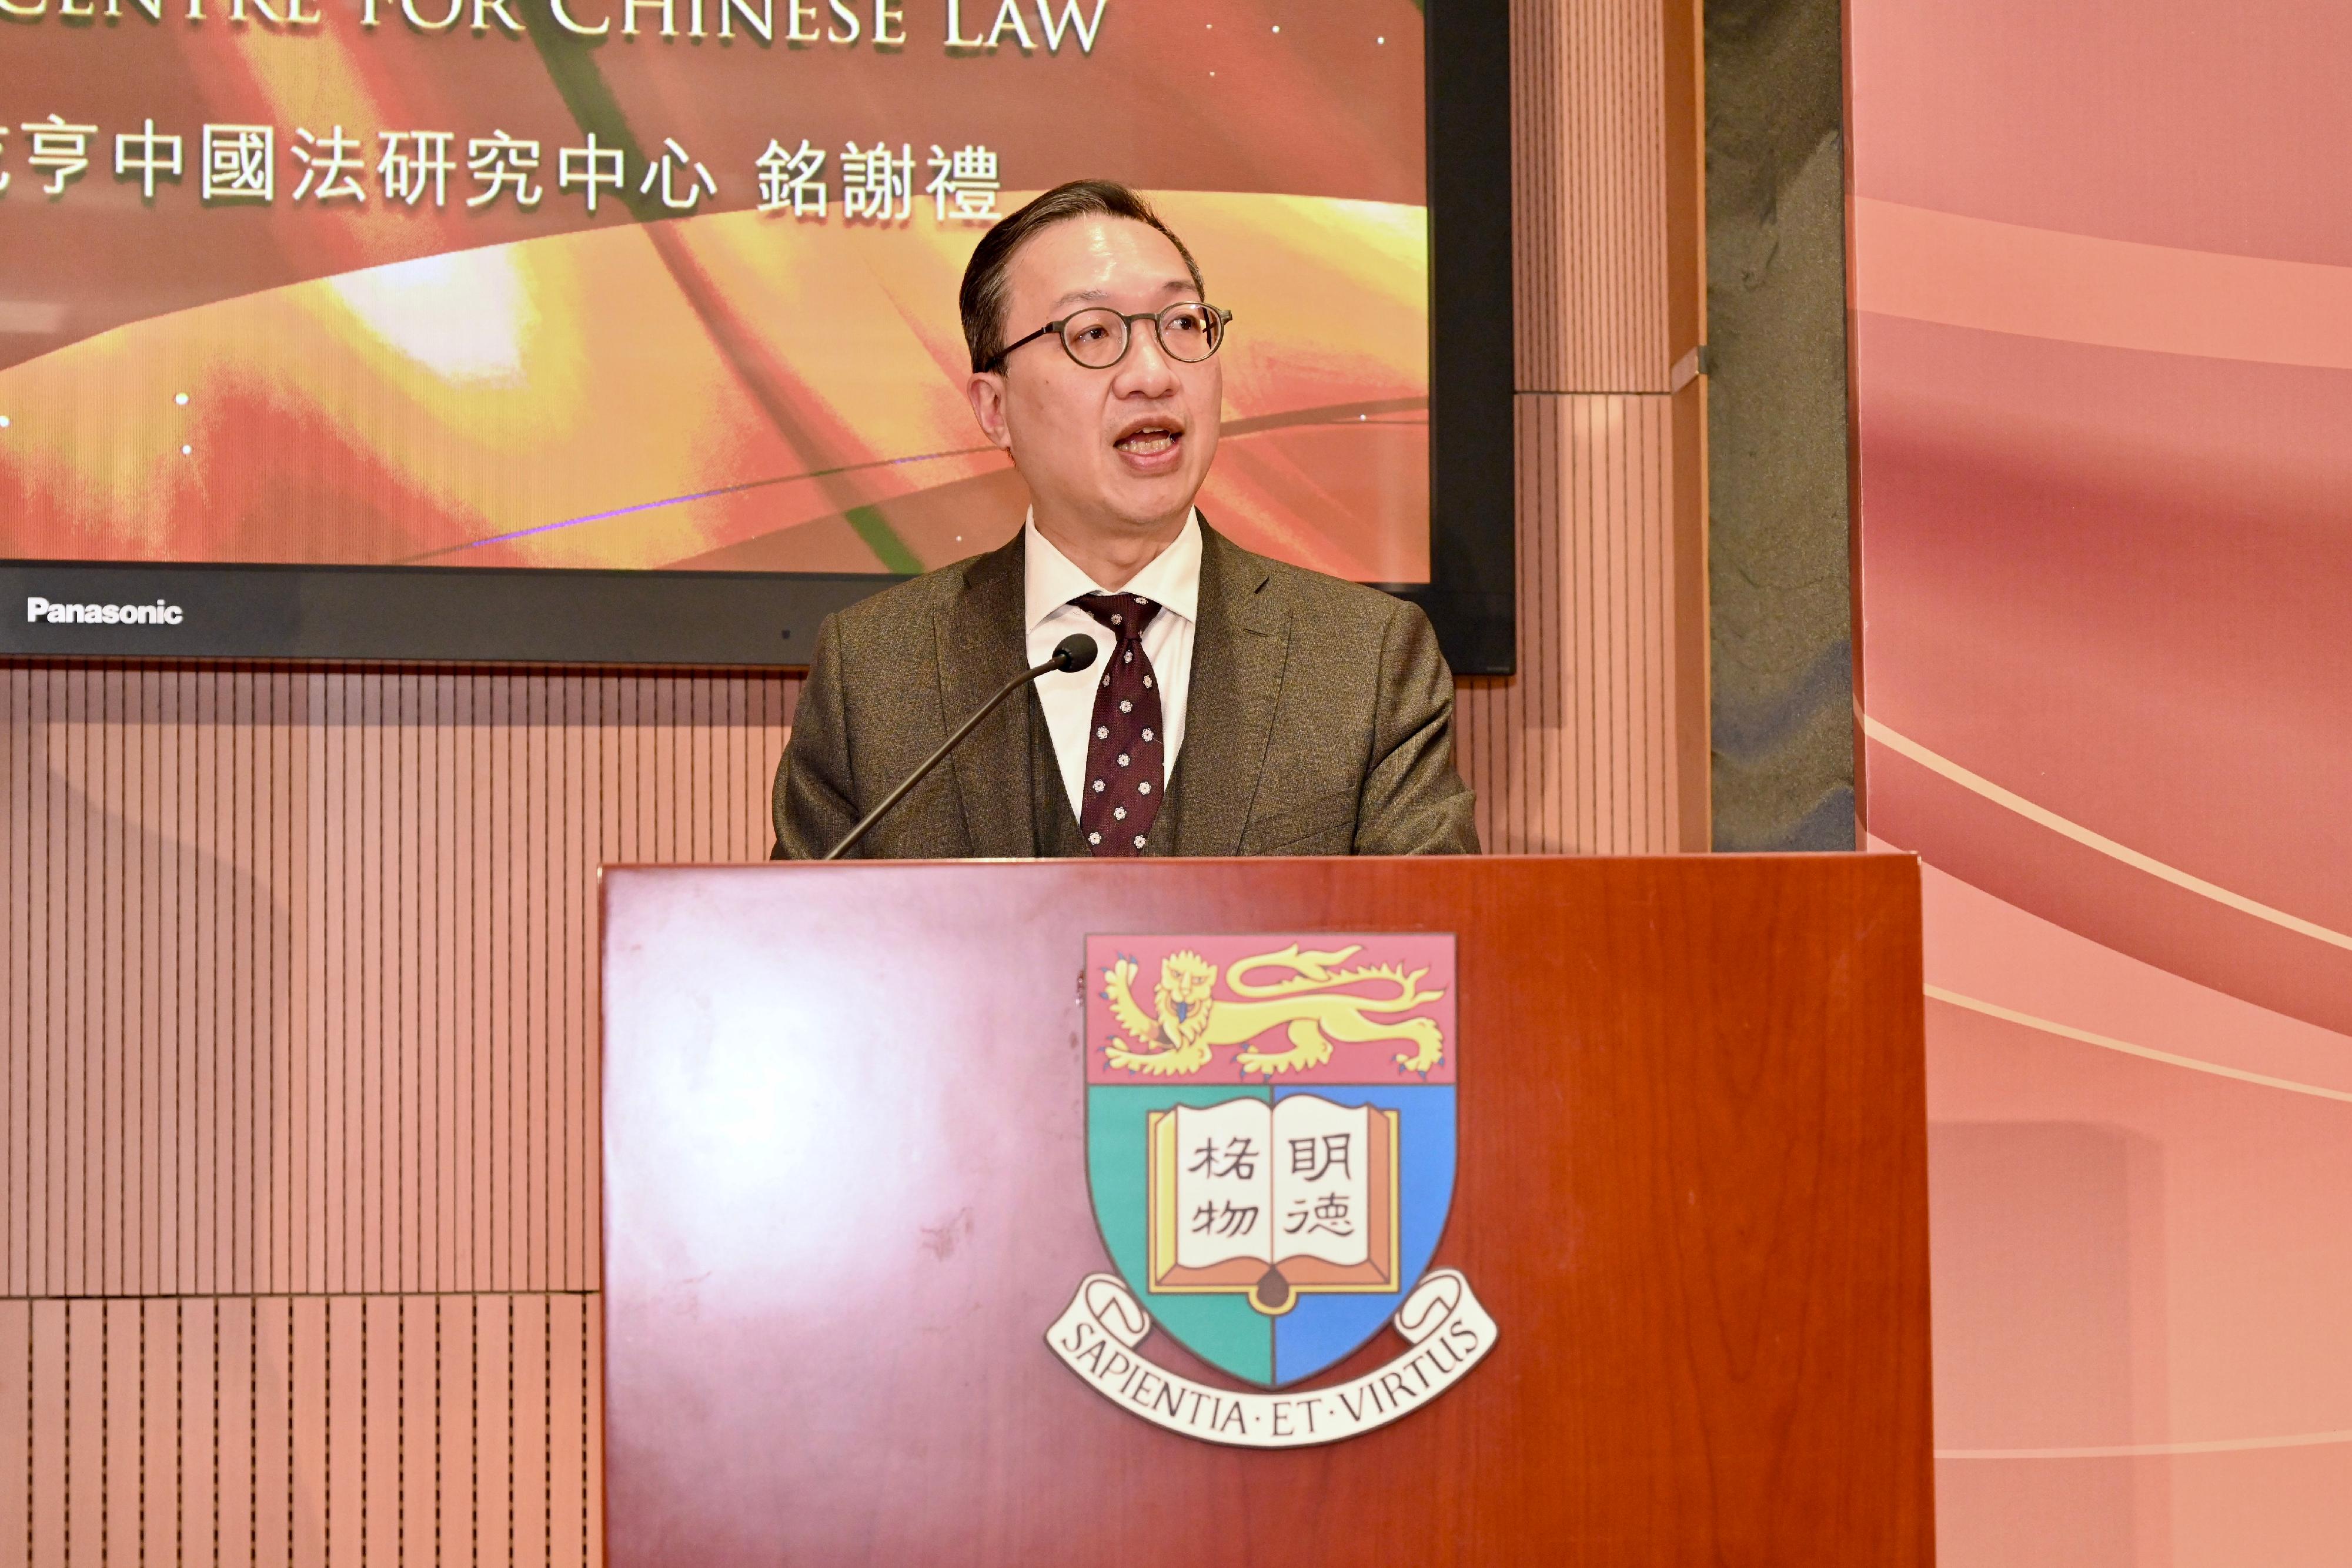 The Secretary for Justice, Mr Paul Lam, SC, speaks at the Dedication Ceremony for the Philip K H Wong Theatre and the Philip K H Wong Centre for Chinese Law at the University of Hong Kong today (December 15).

